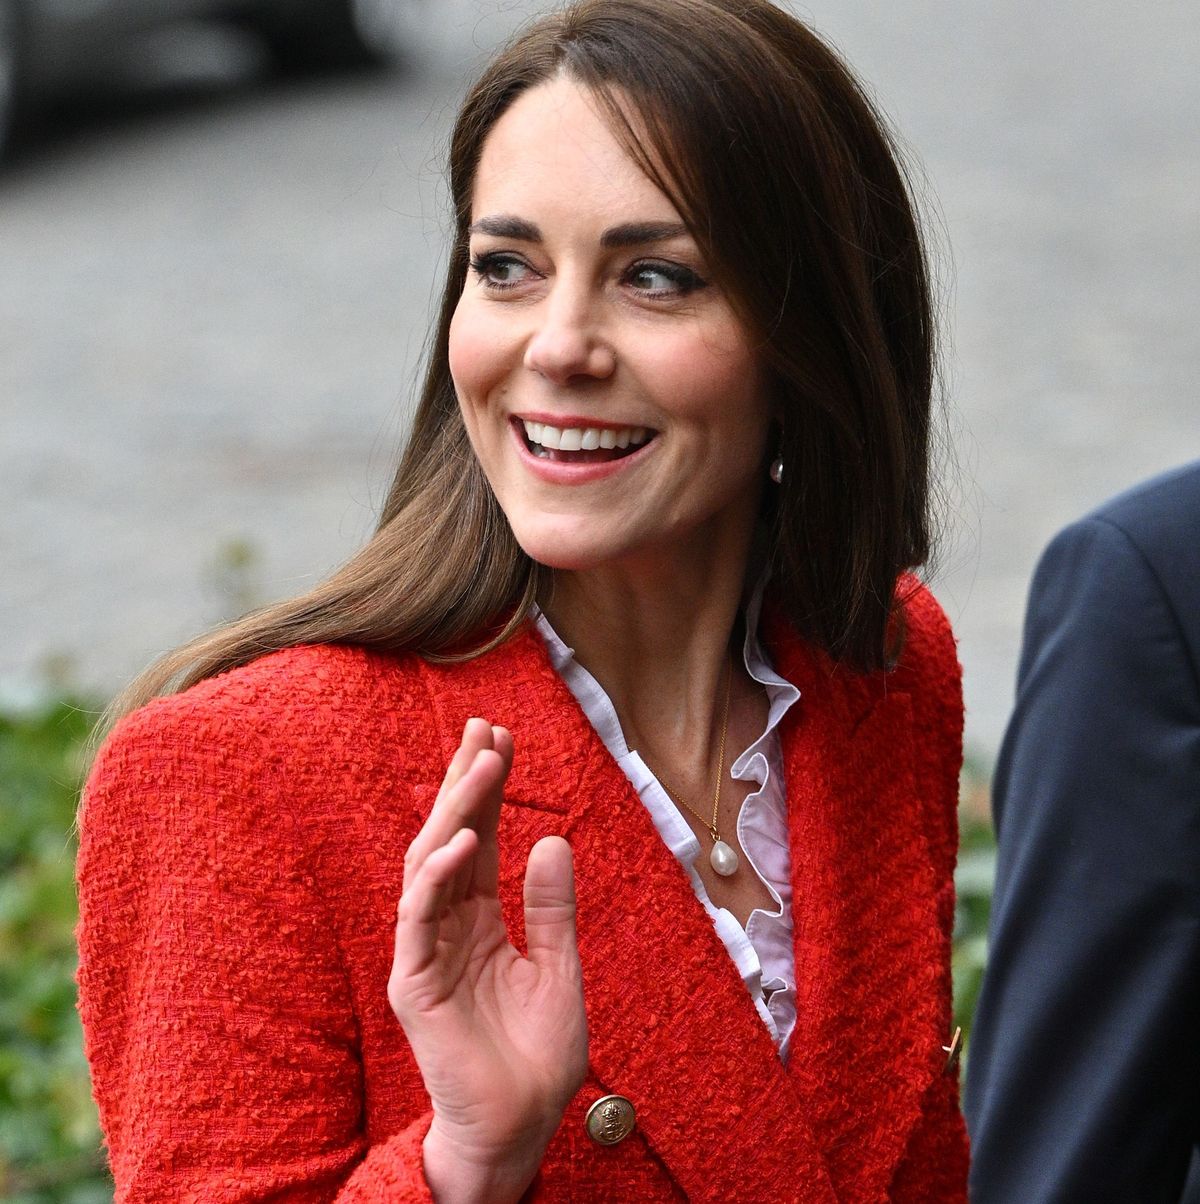 copenhagen, denmark   february 22 catherine, duchess of cambridge arrives for a visit of the copenhagen infant mental health project at the university of copenhagen on february 22, 2022 in copenhagen, denmark the duchess of cambridge visits copenhagen between 22nd and 23rd february on a working visit with the royal foundation centre for early childhood  photo by samir husseinwireimage